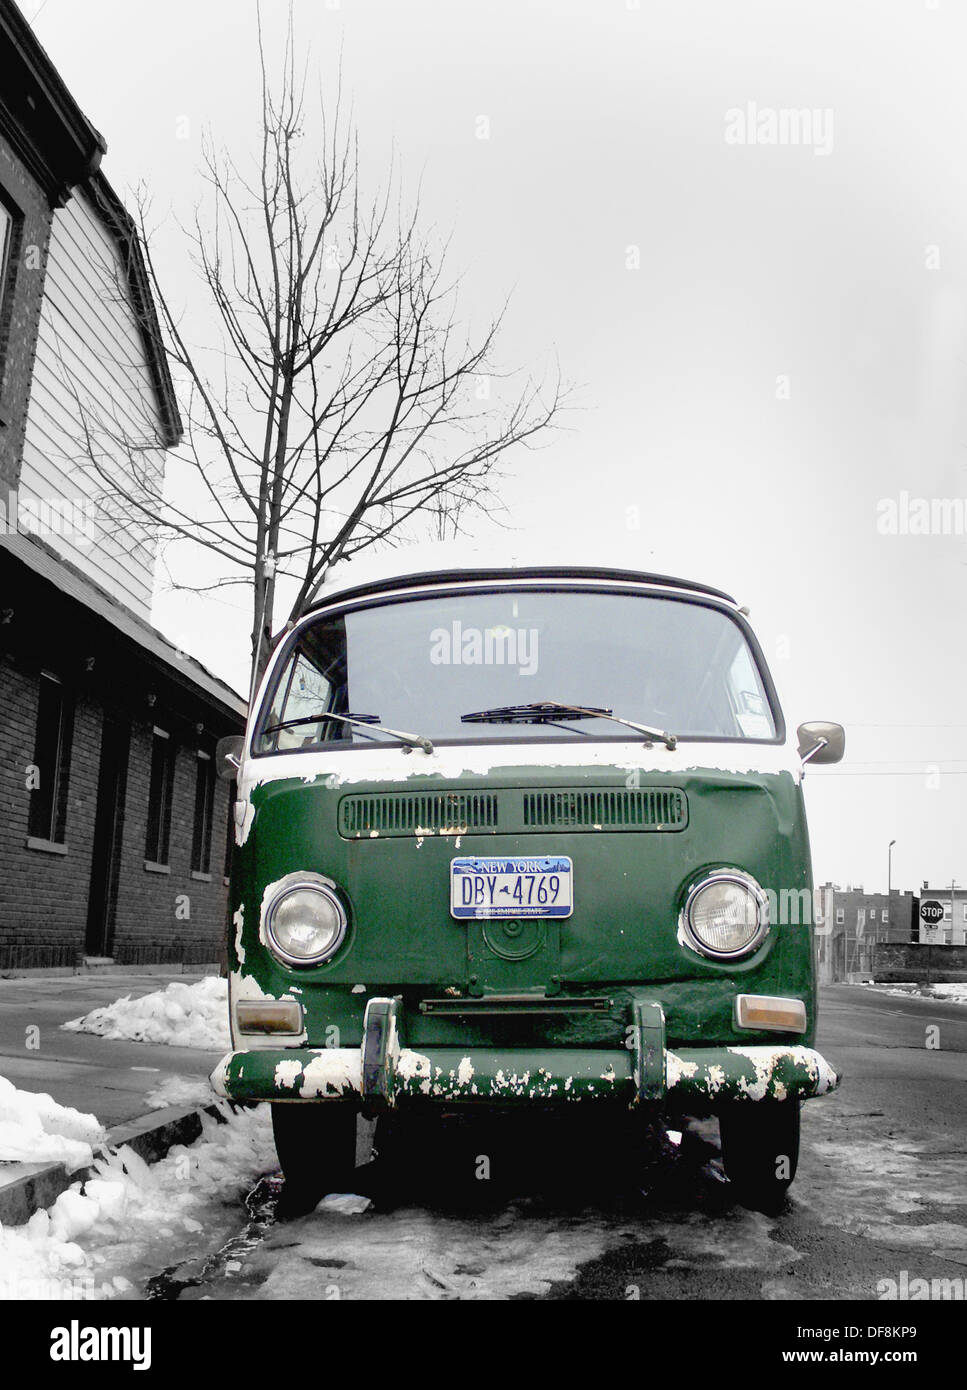 Vintage Vw Bus High Resolution Stock Photography and Images - Alamy